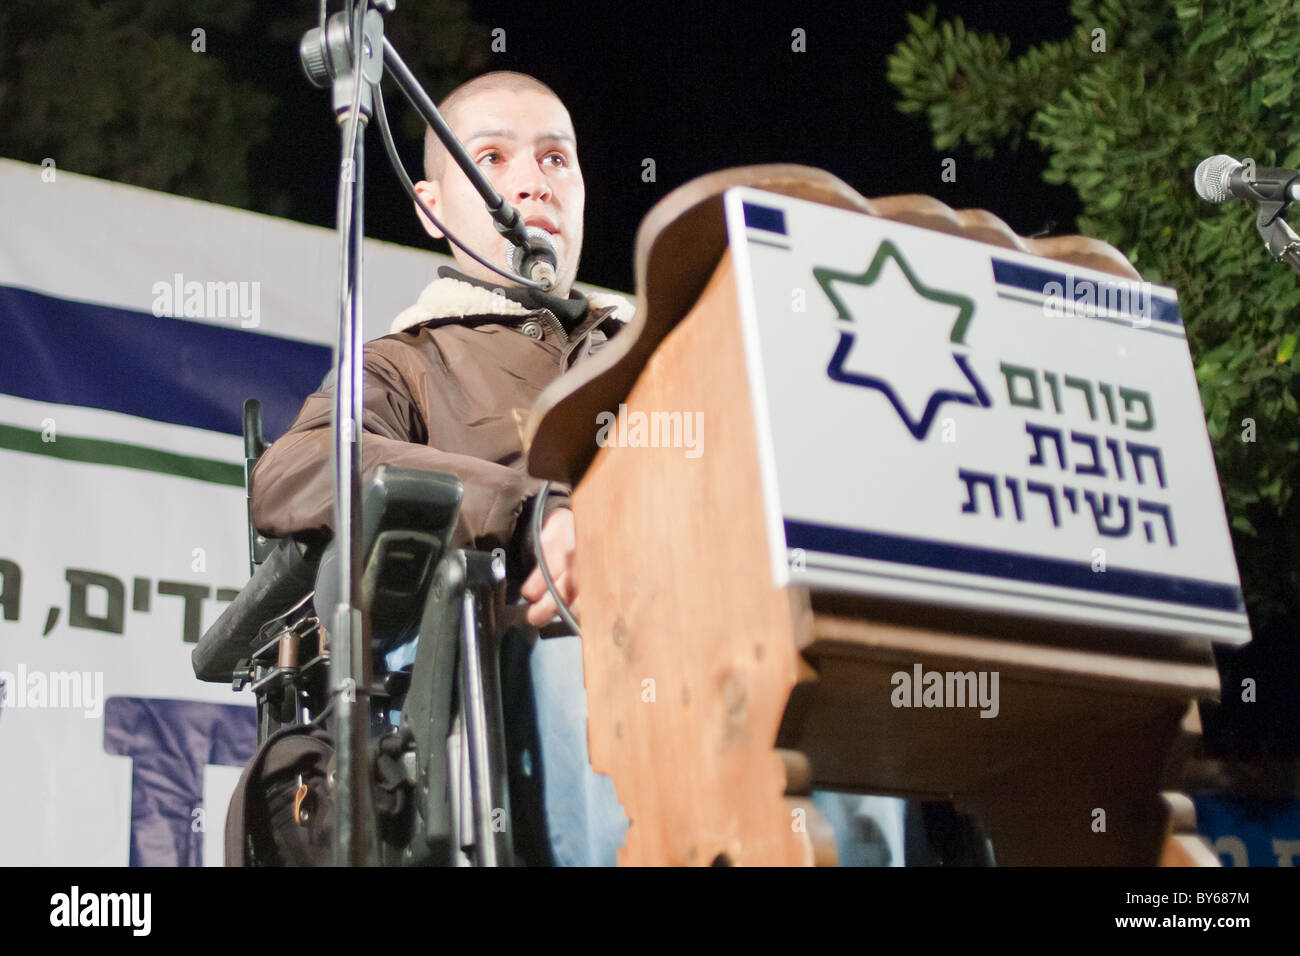 A three-day military-style march protesting draft evasion has reached its final leg. Jerusalem, Israel. 20/01/2011. Stock Photo